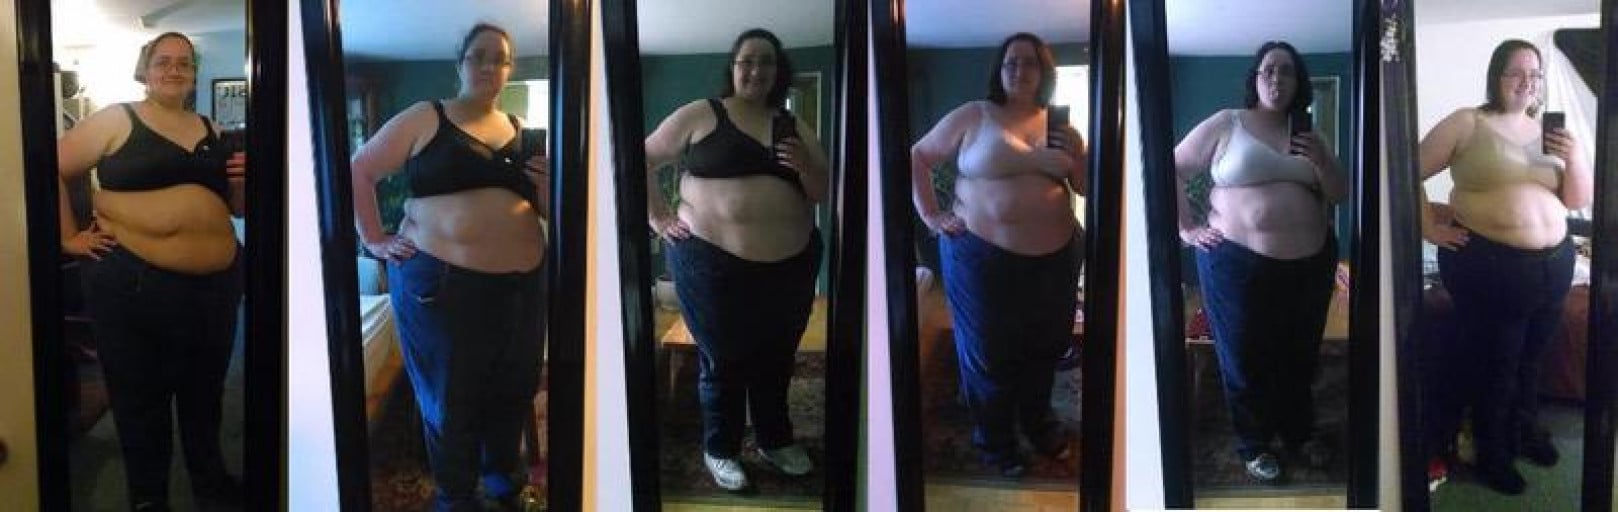 A progress pic of a 5'6" woman showing a fat loss from 371 pounds to 329 pounds. A respectable loss of 42 pounds.